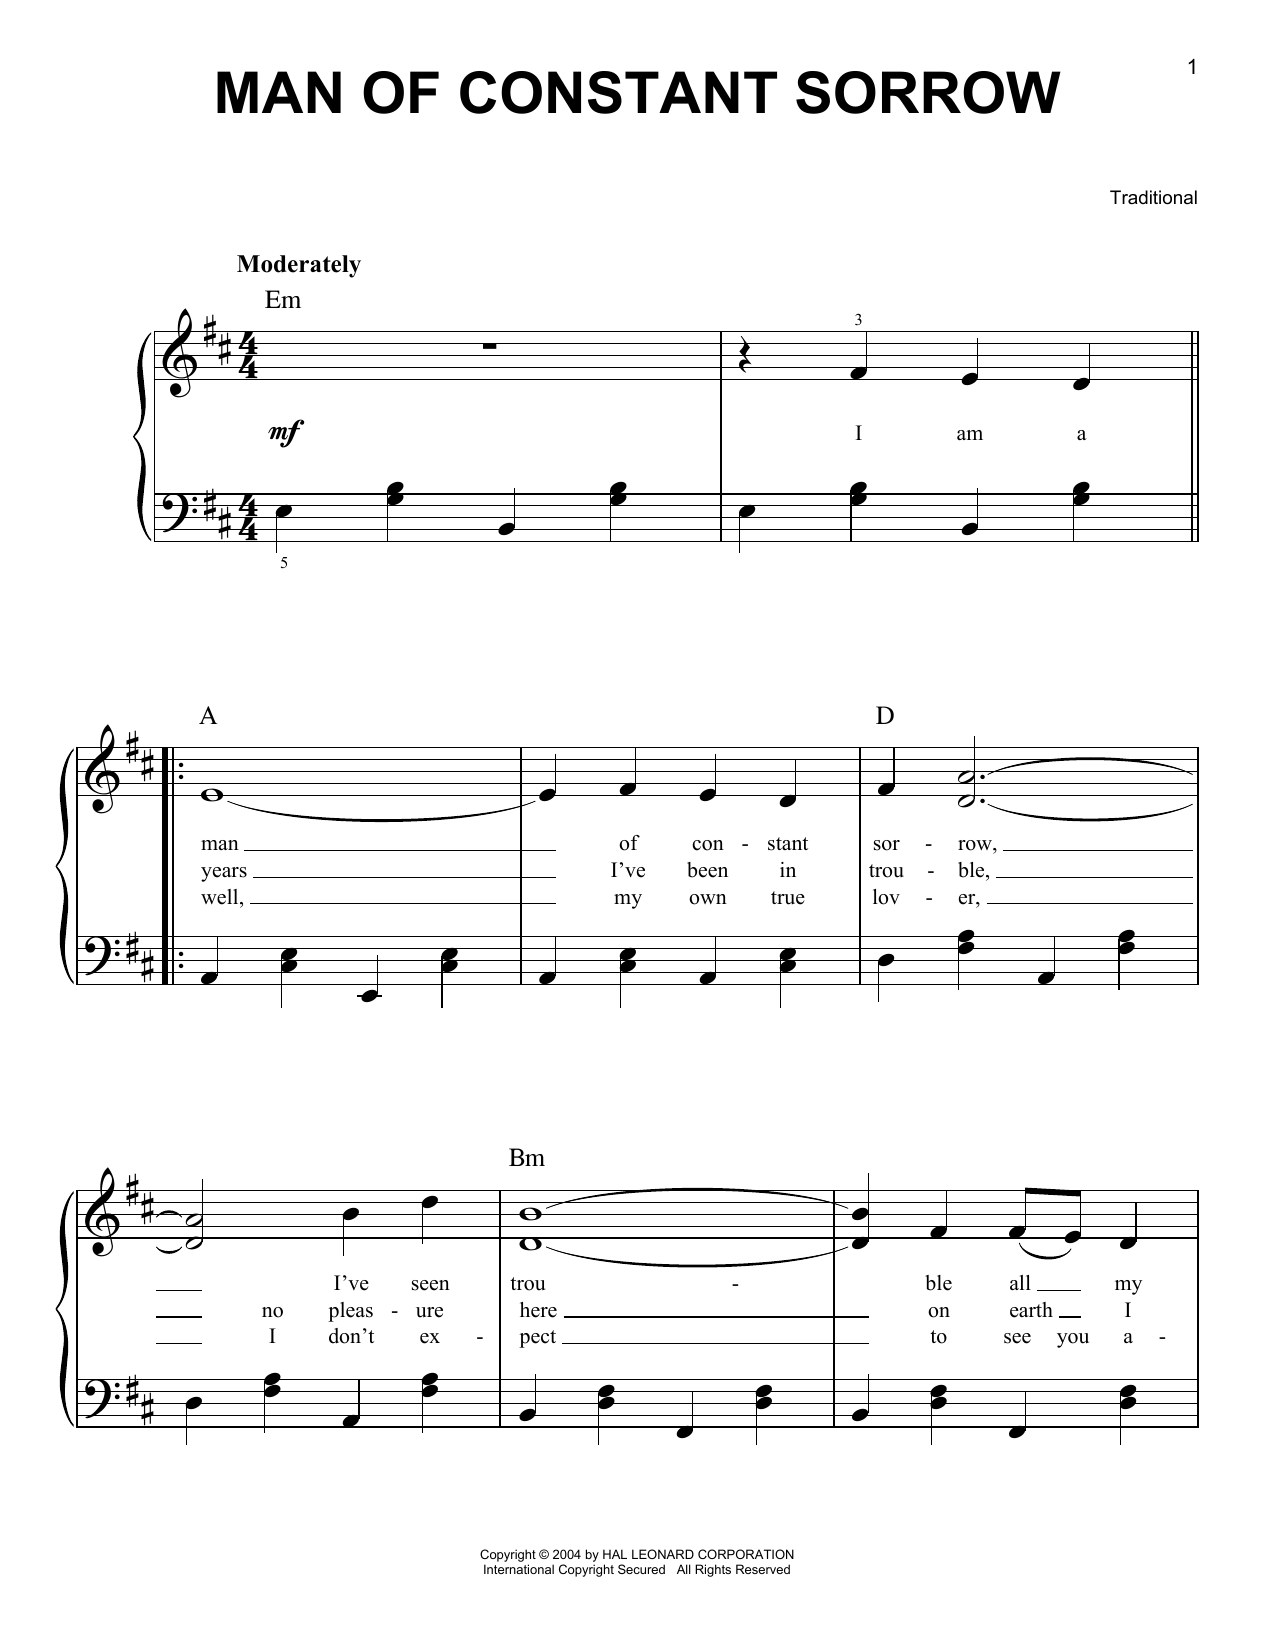 Traditional Man Of Constant Sorrow sheet music preview music notes and score for Guitar Tab including 2 page(s)